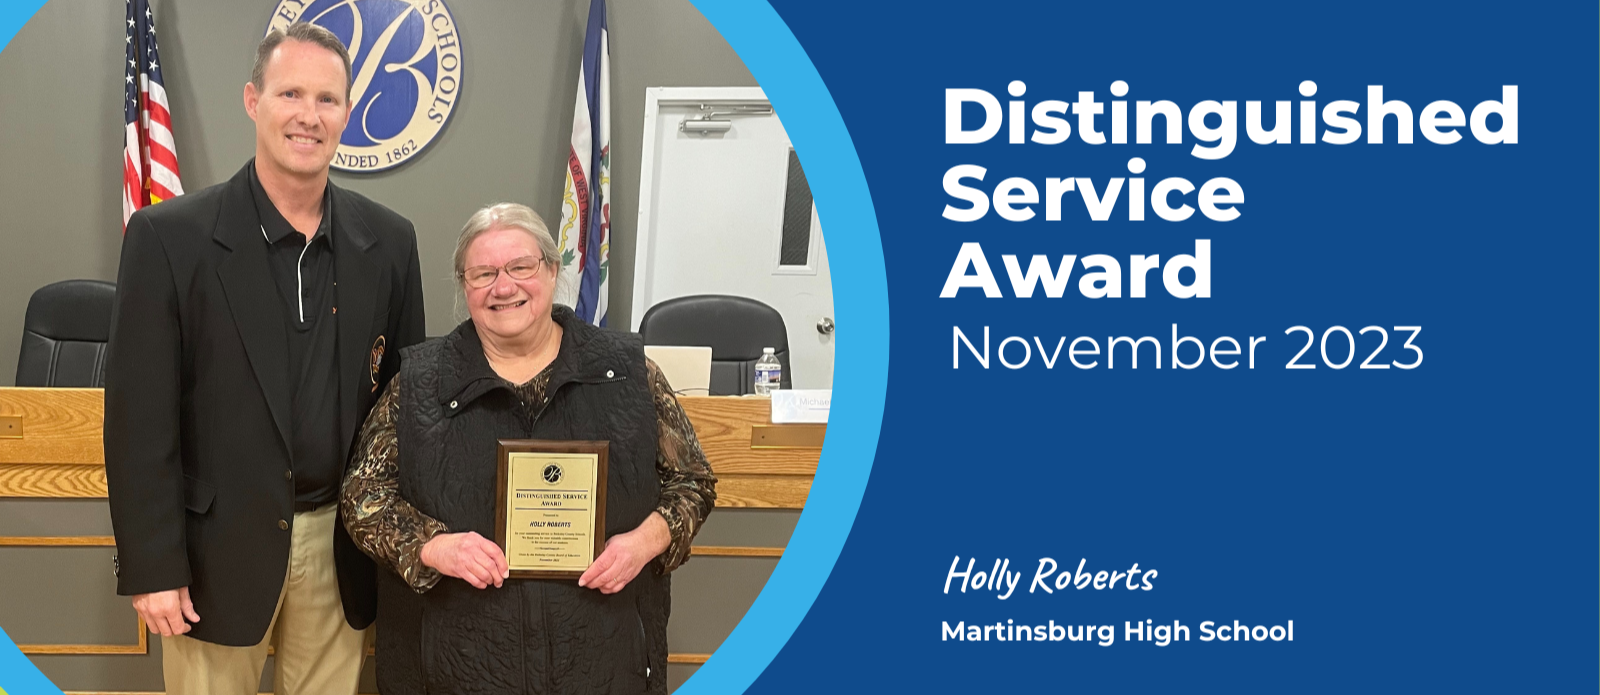 image of November 2023 Distinguished Service Award recipient holly roberts standing with principal trent sherman